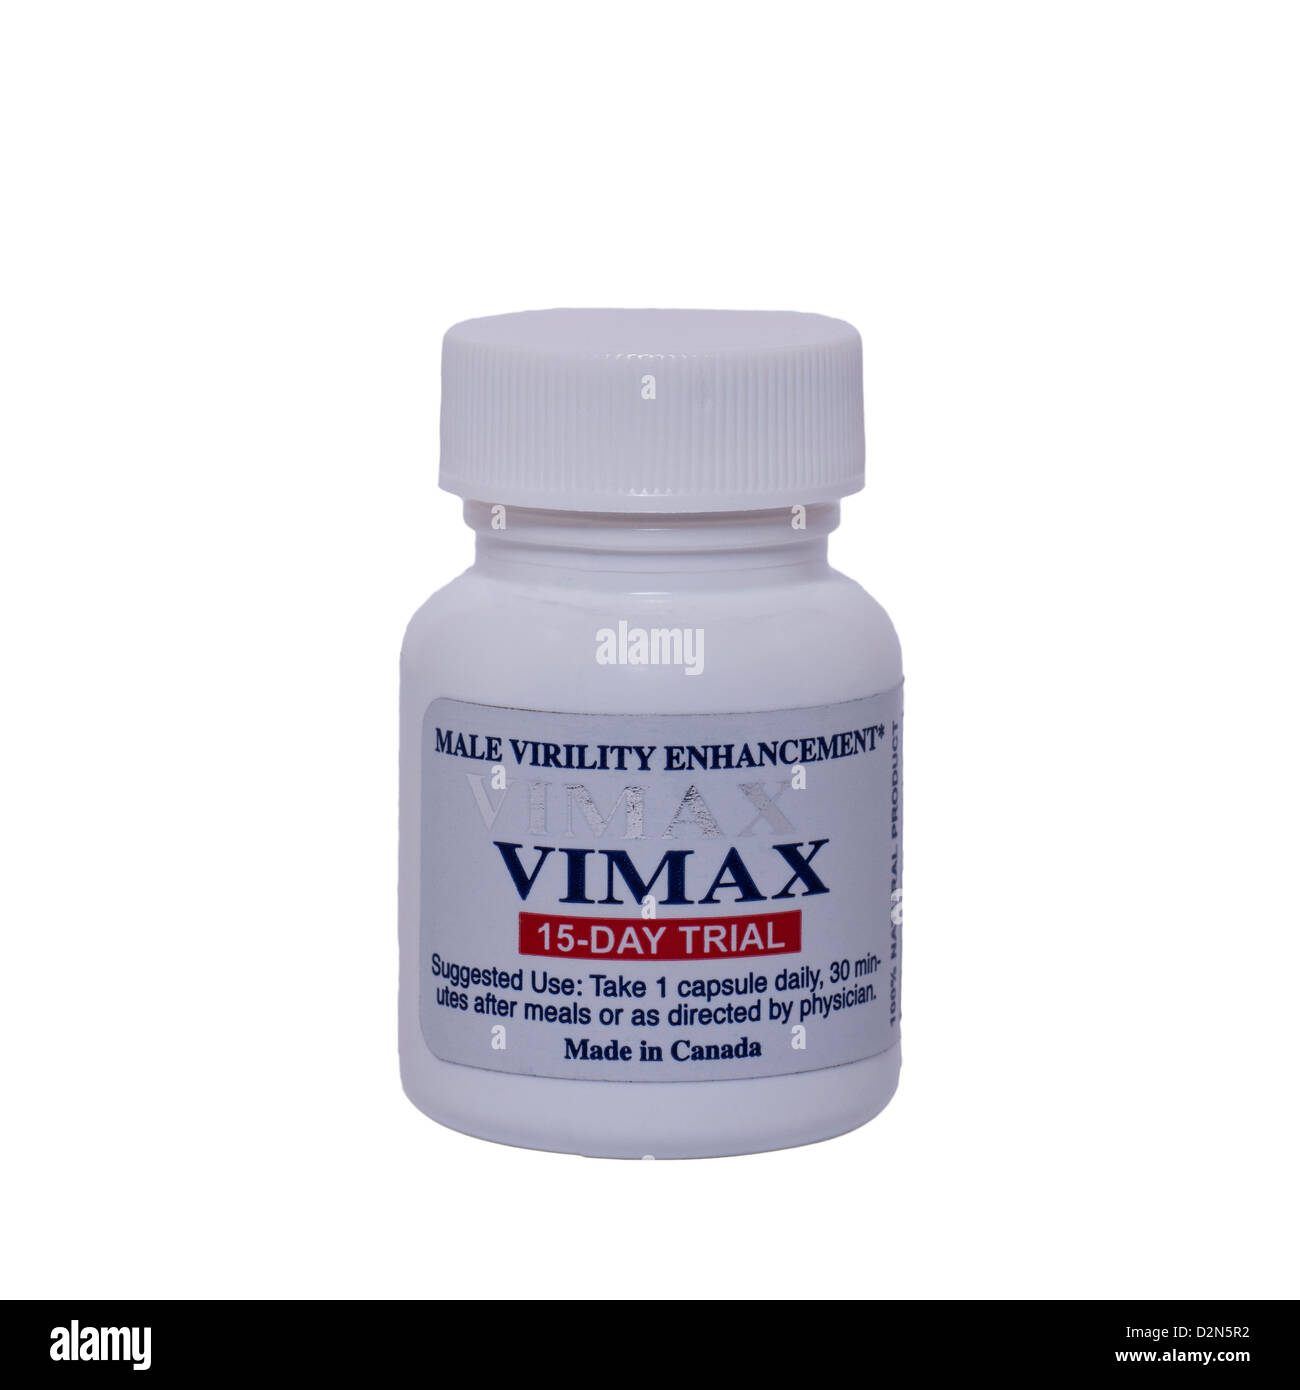 A tub of Vimax capsules for male virility enhancement on a white background Stock Photo